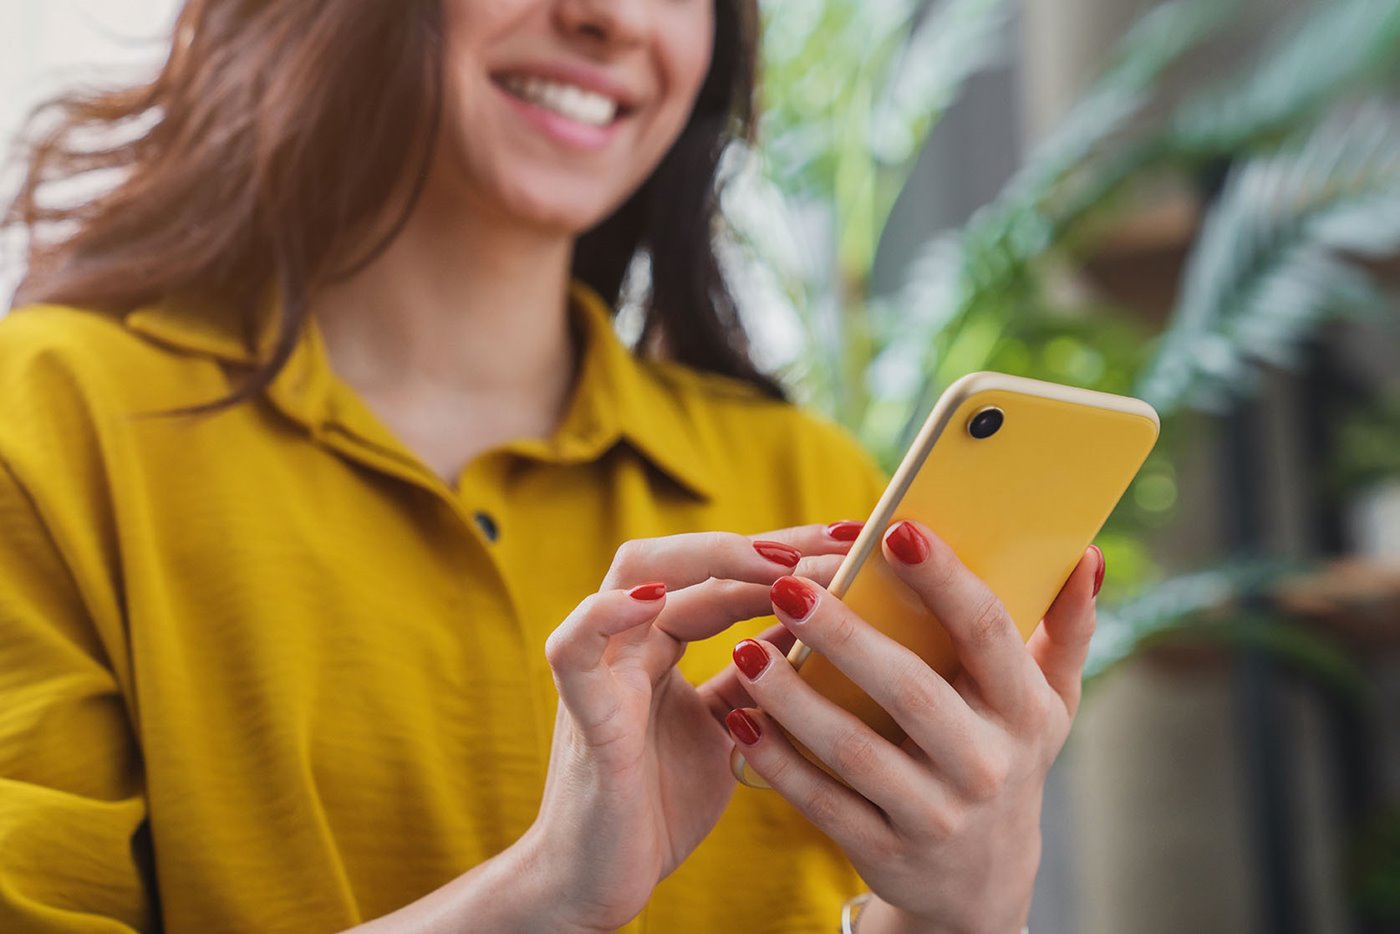 A woman in yellow smiles at the smartphone in her hands